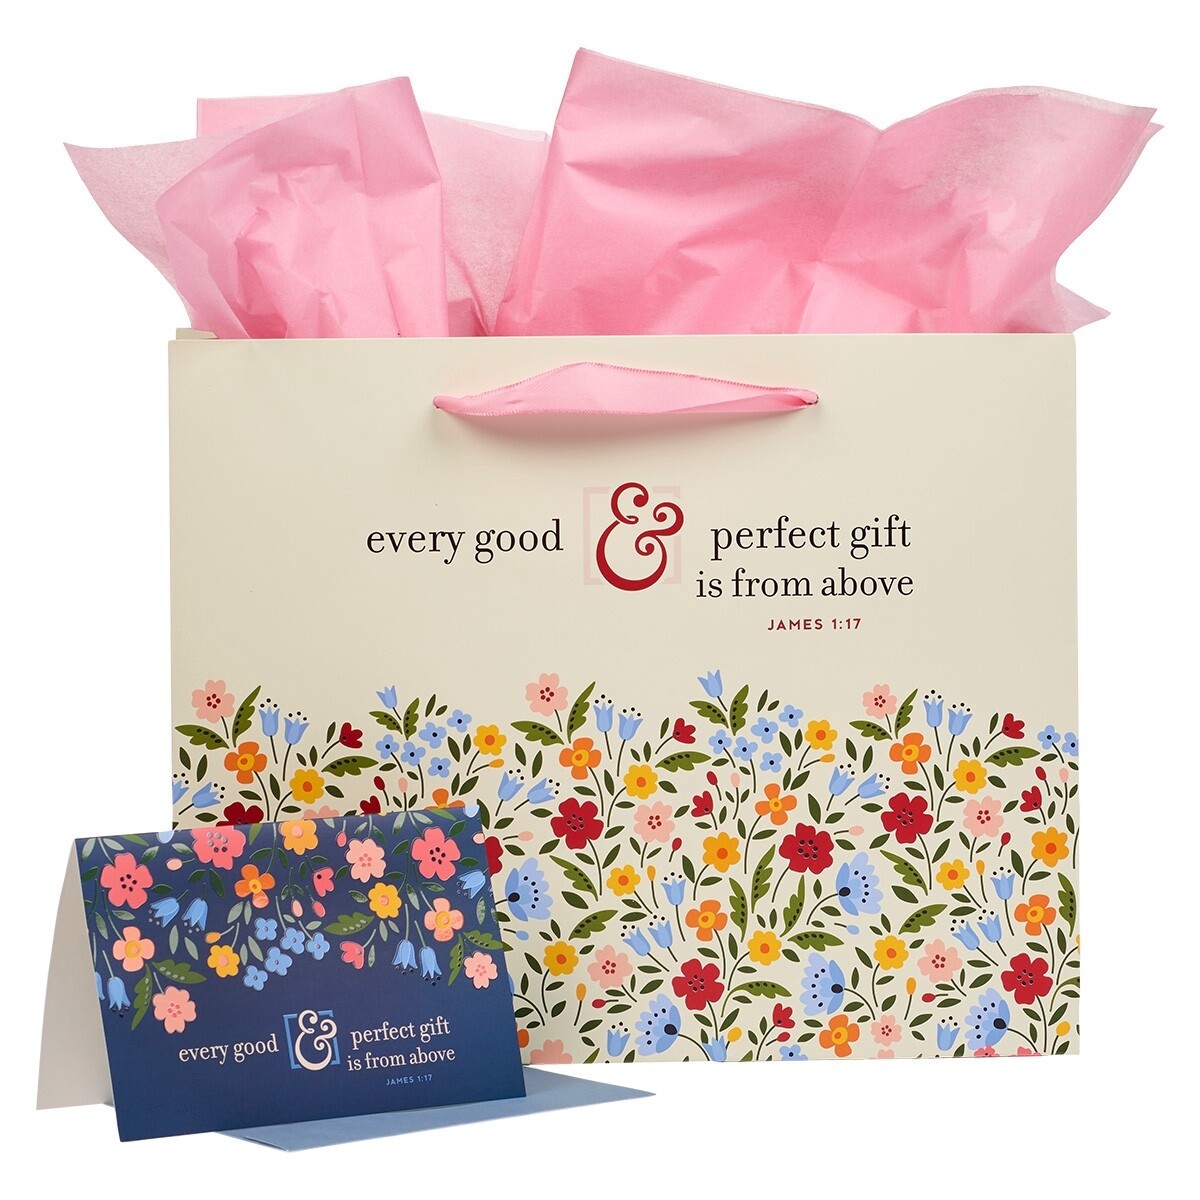 Every Good &amp; Perfect Gift Peach Floral Large Landscape Gift Bag and Card Set - James 1:17